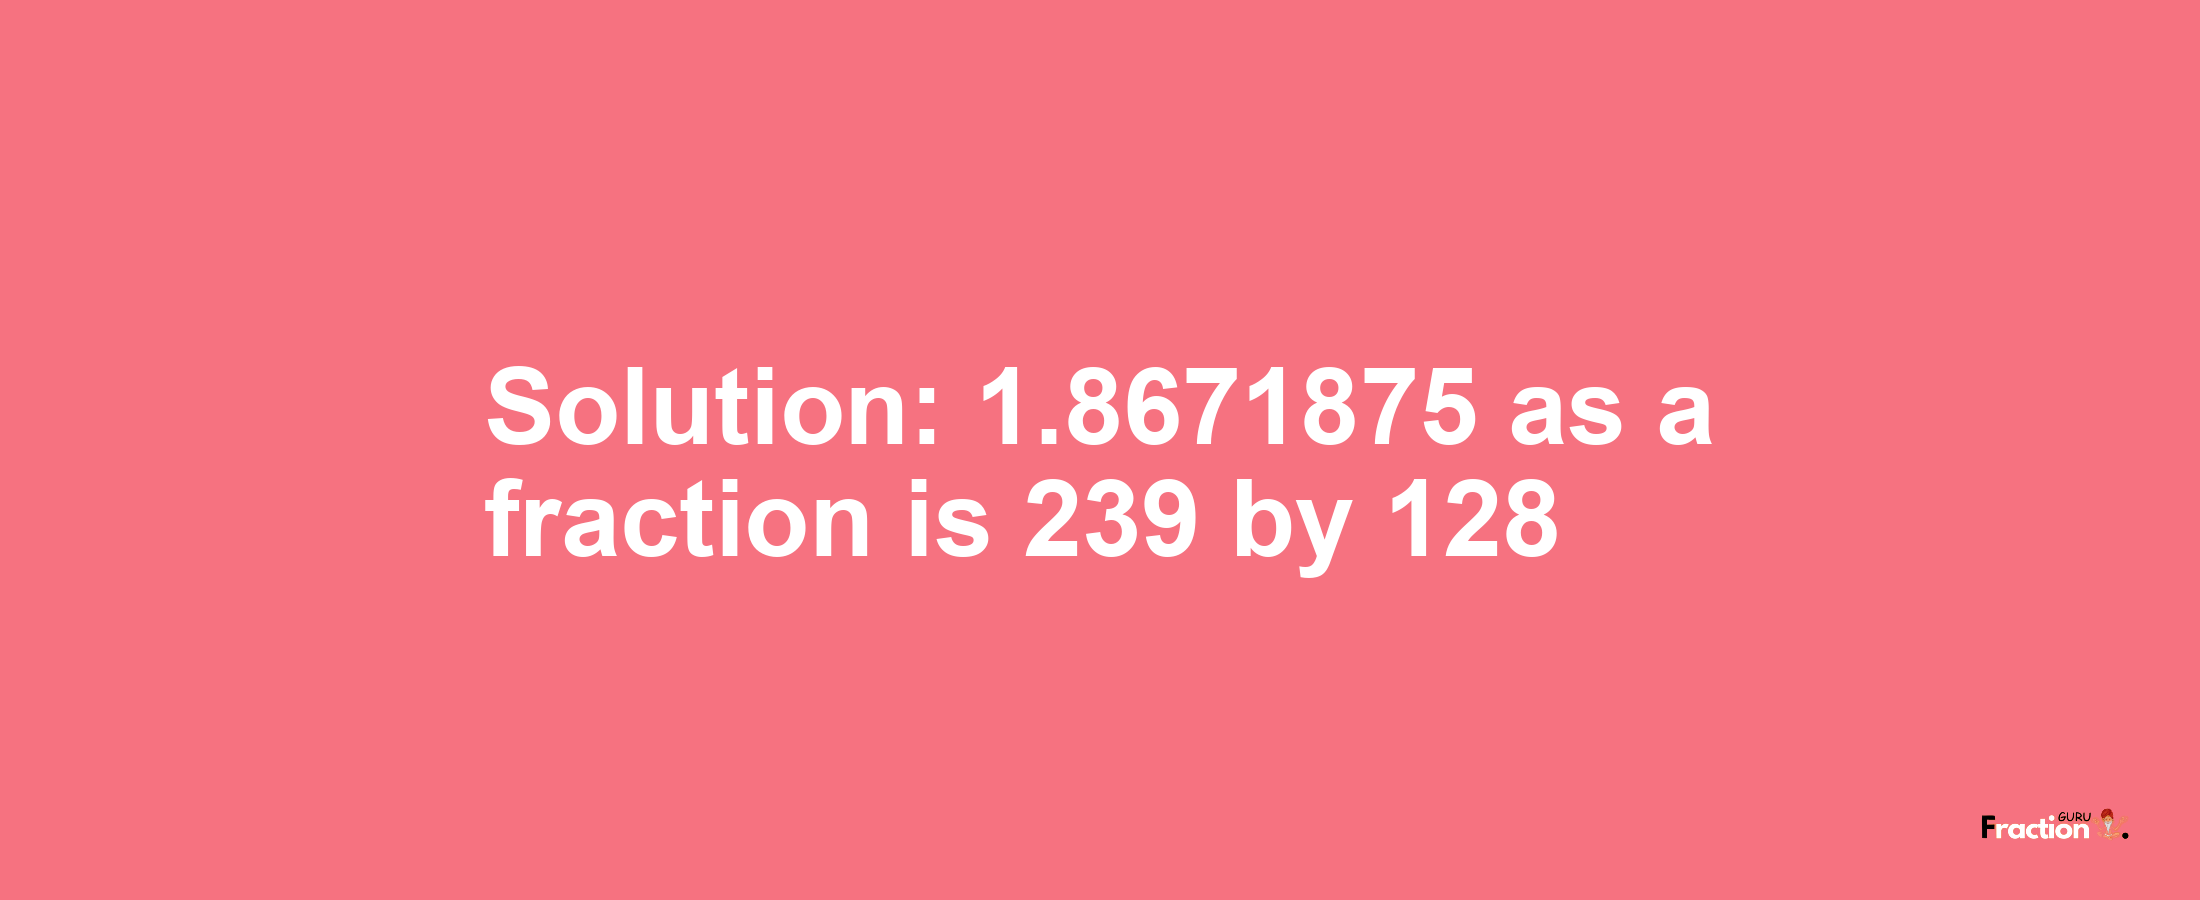 Solution:1.8671875 as a fraction is 239/128